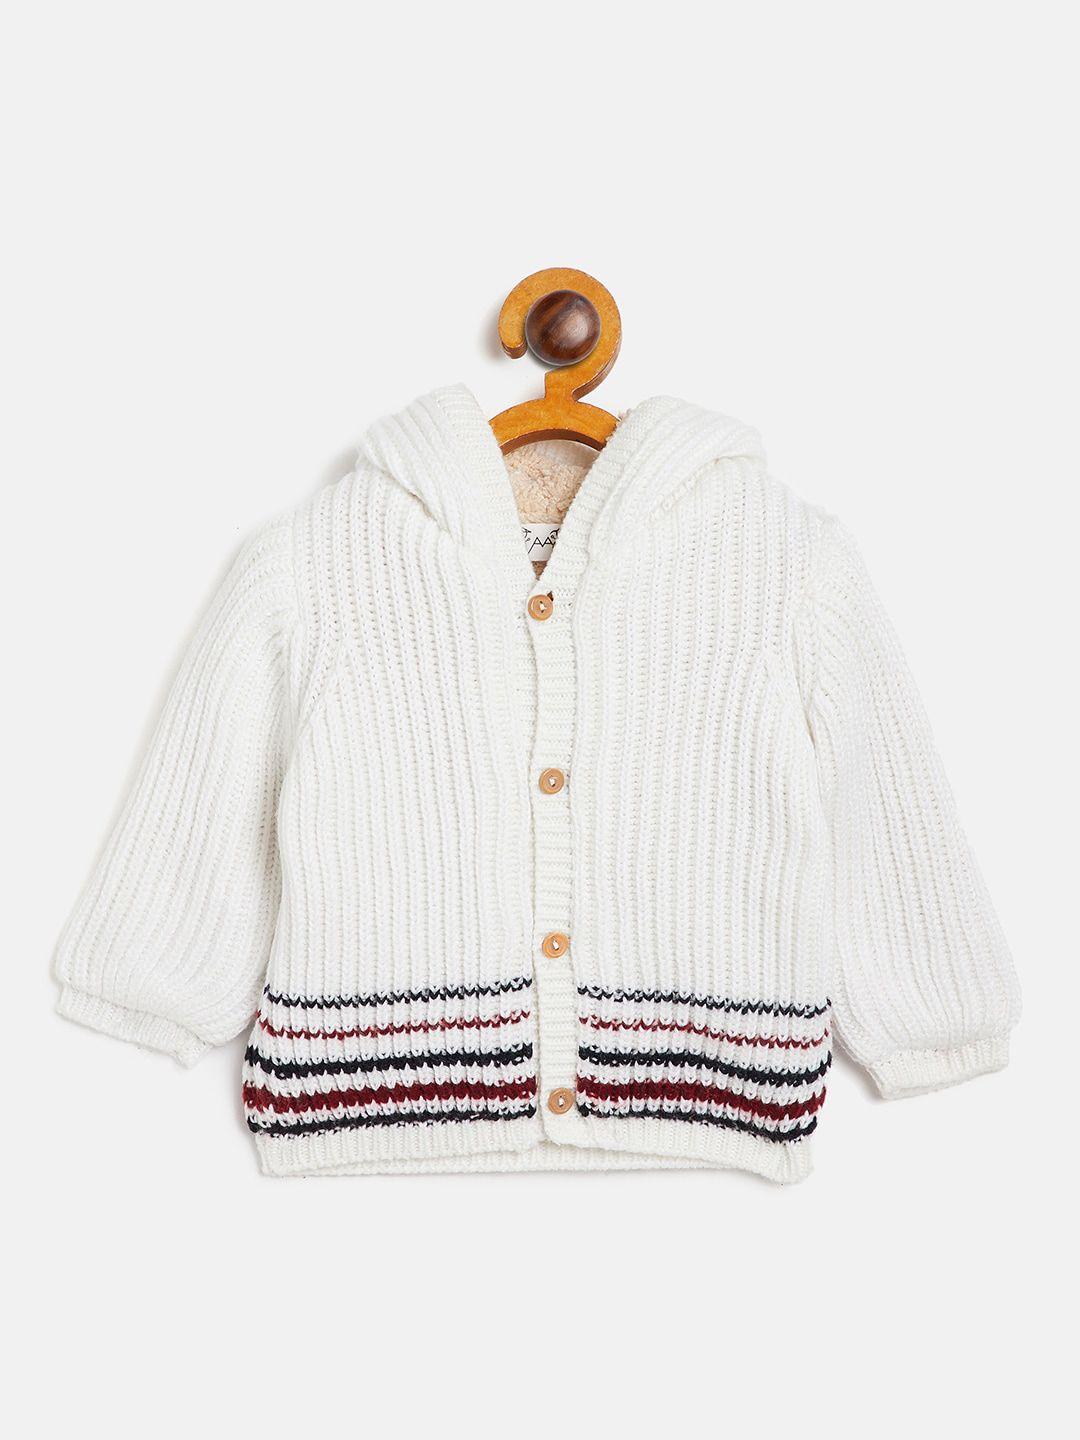 jwaaq unisex kids white & black cable knit printed pullover